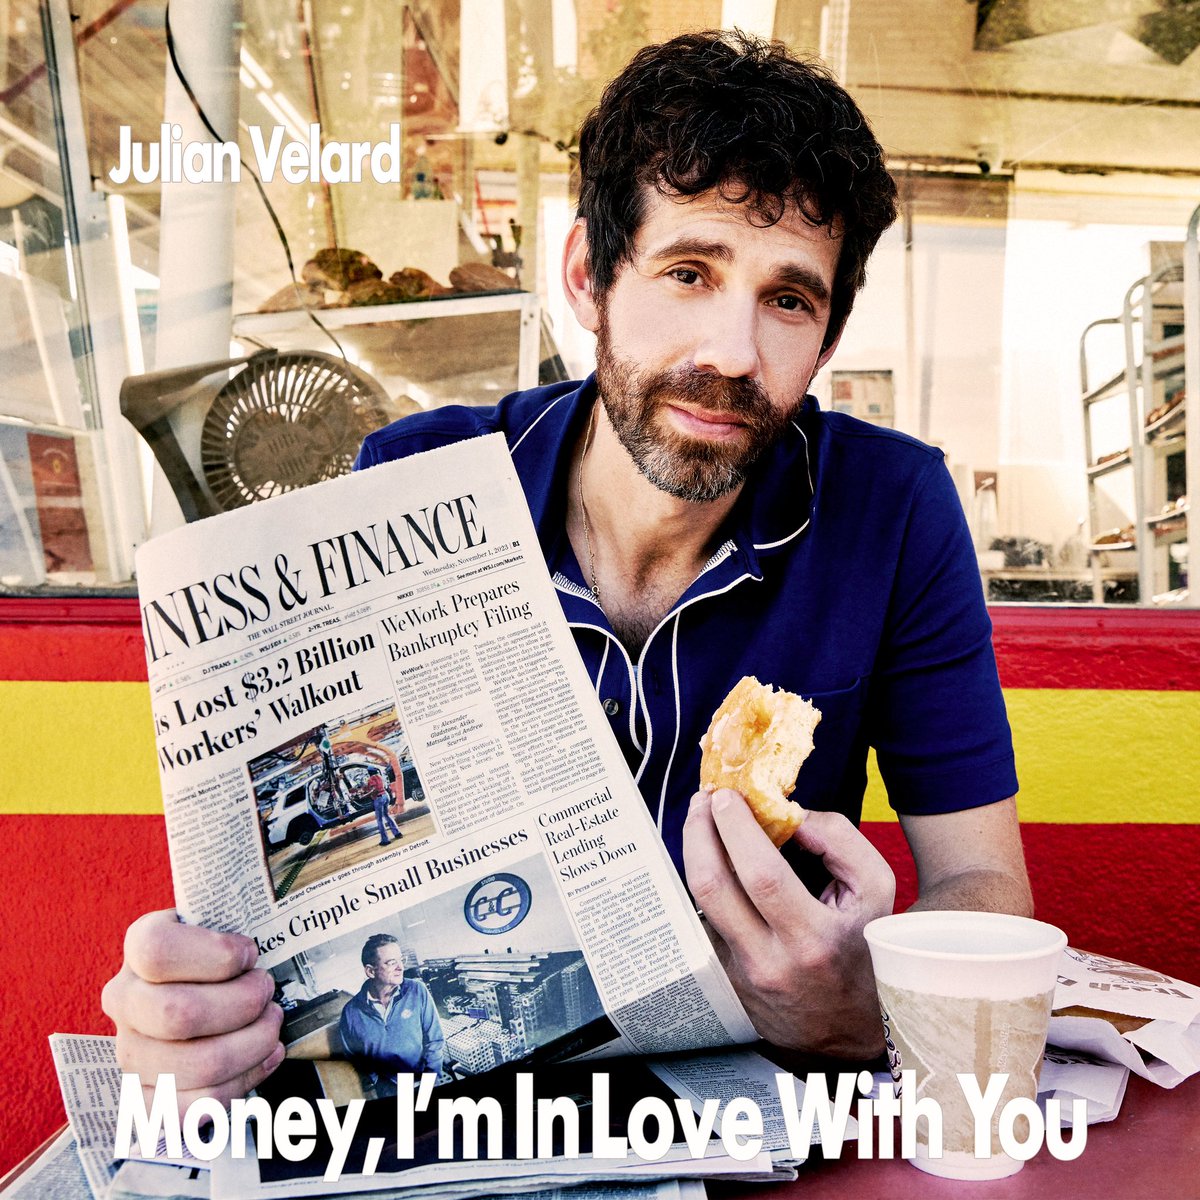 NEW MUSIC OUT TODAY! The next single from my #midlifecrisis album is available worldwide. It’s caller “Money, I’m In Love With You.”

Stream the single on your platform of choice, or download the whole album exclusively on my Bandcamp here - linktr.ee/julianvelard